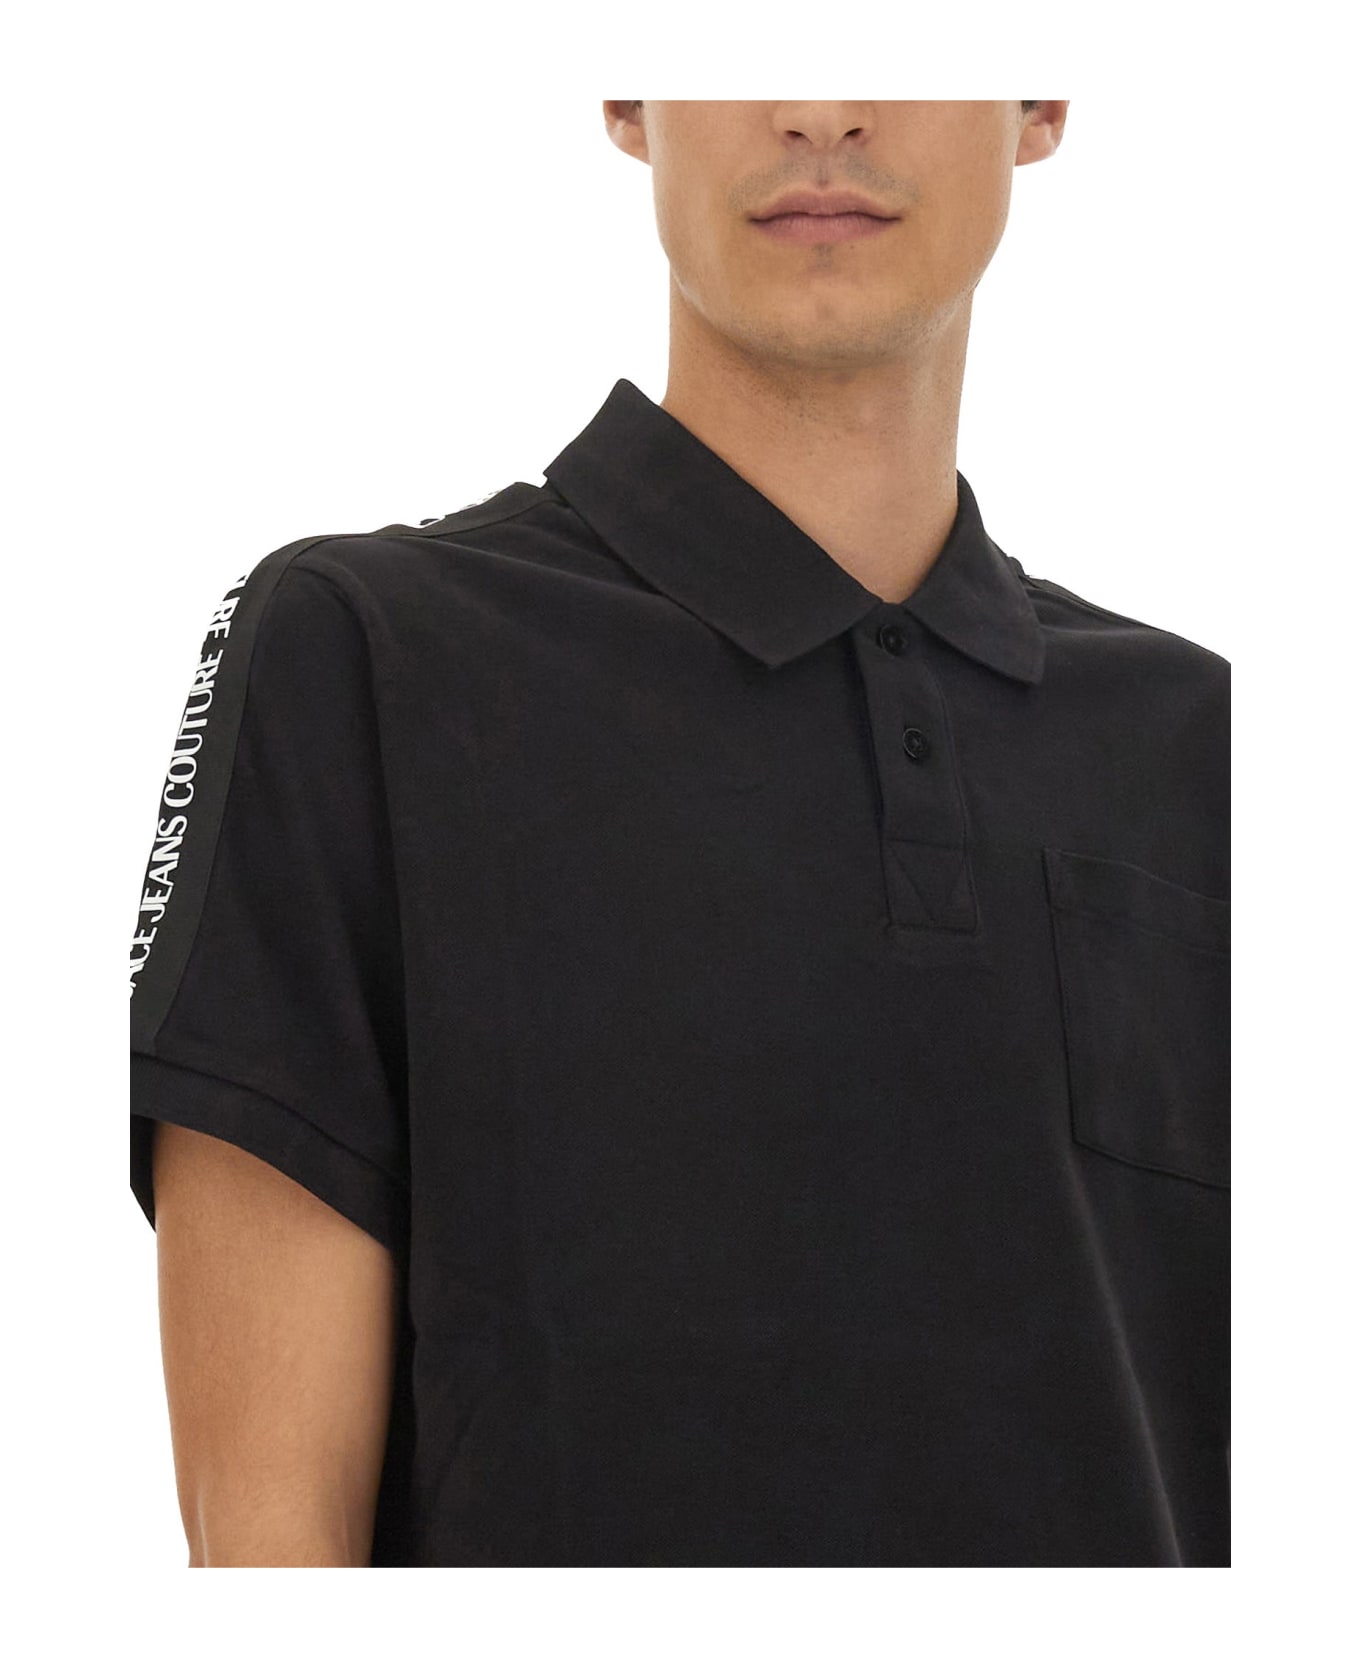 Versace Jeans Couture Regular Fit Polo Shirt - Black ポロシャツ